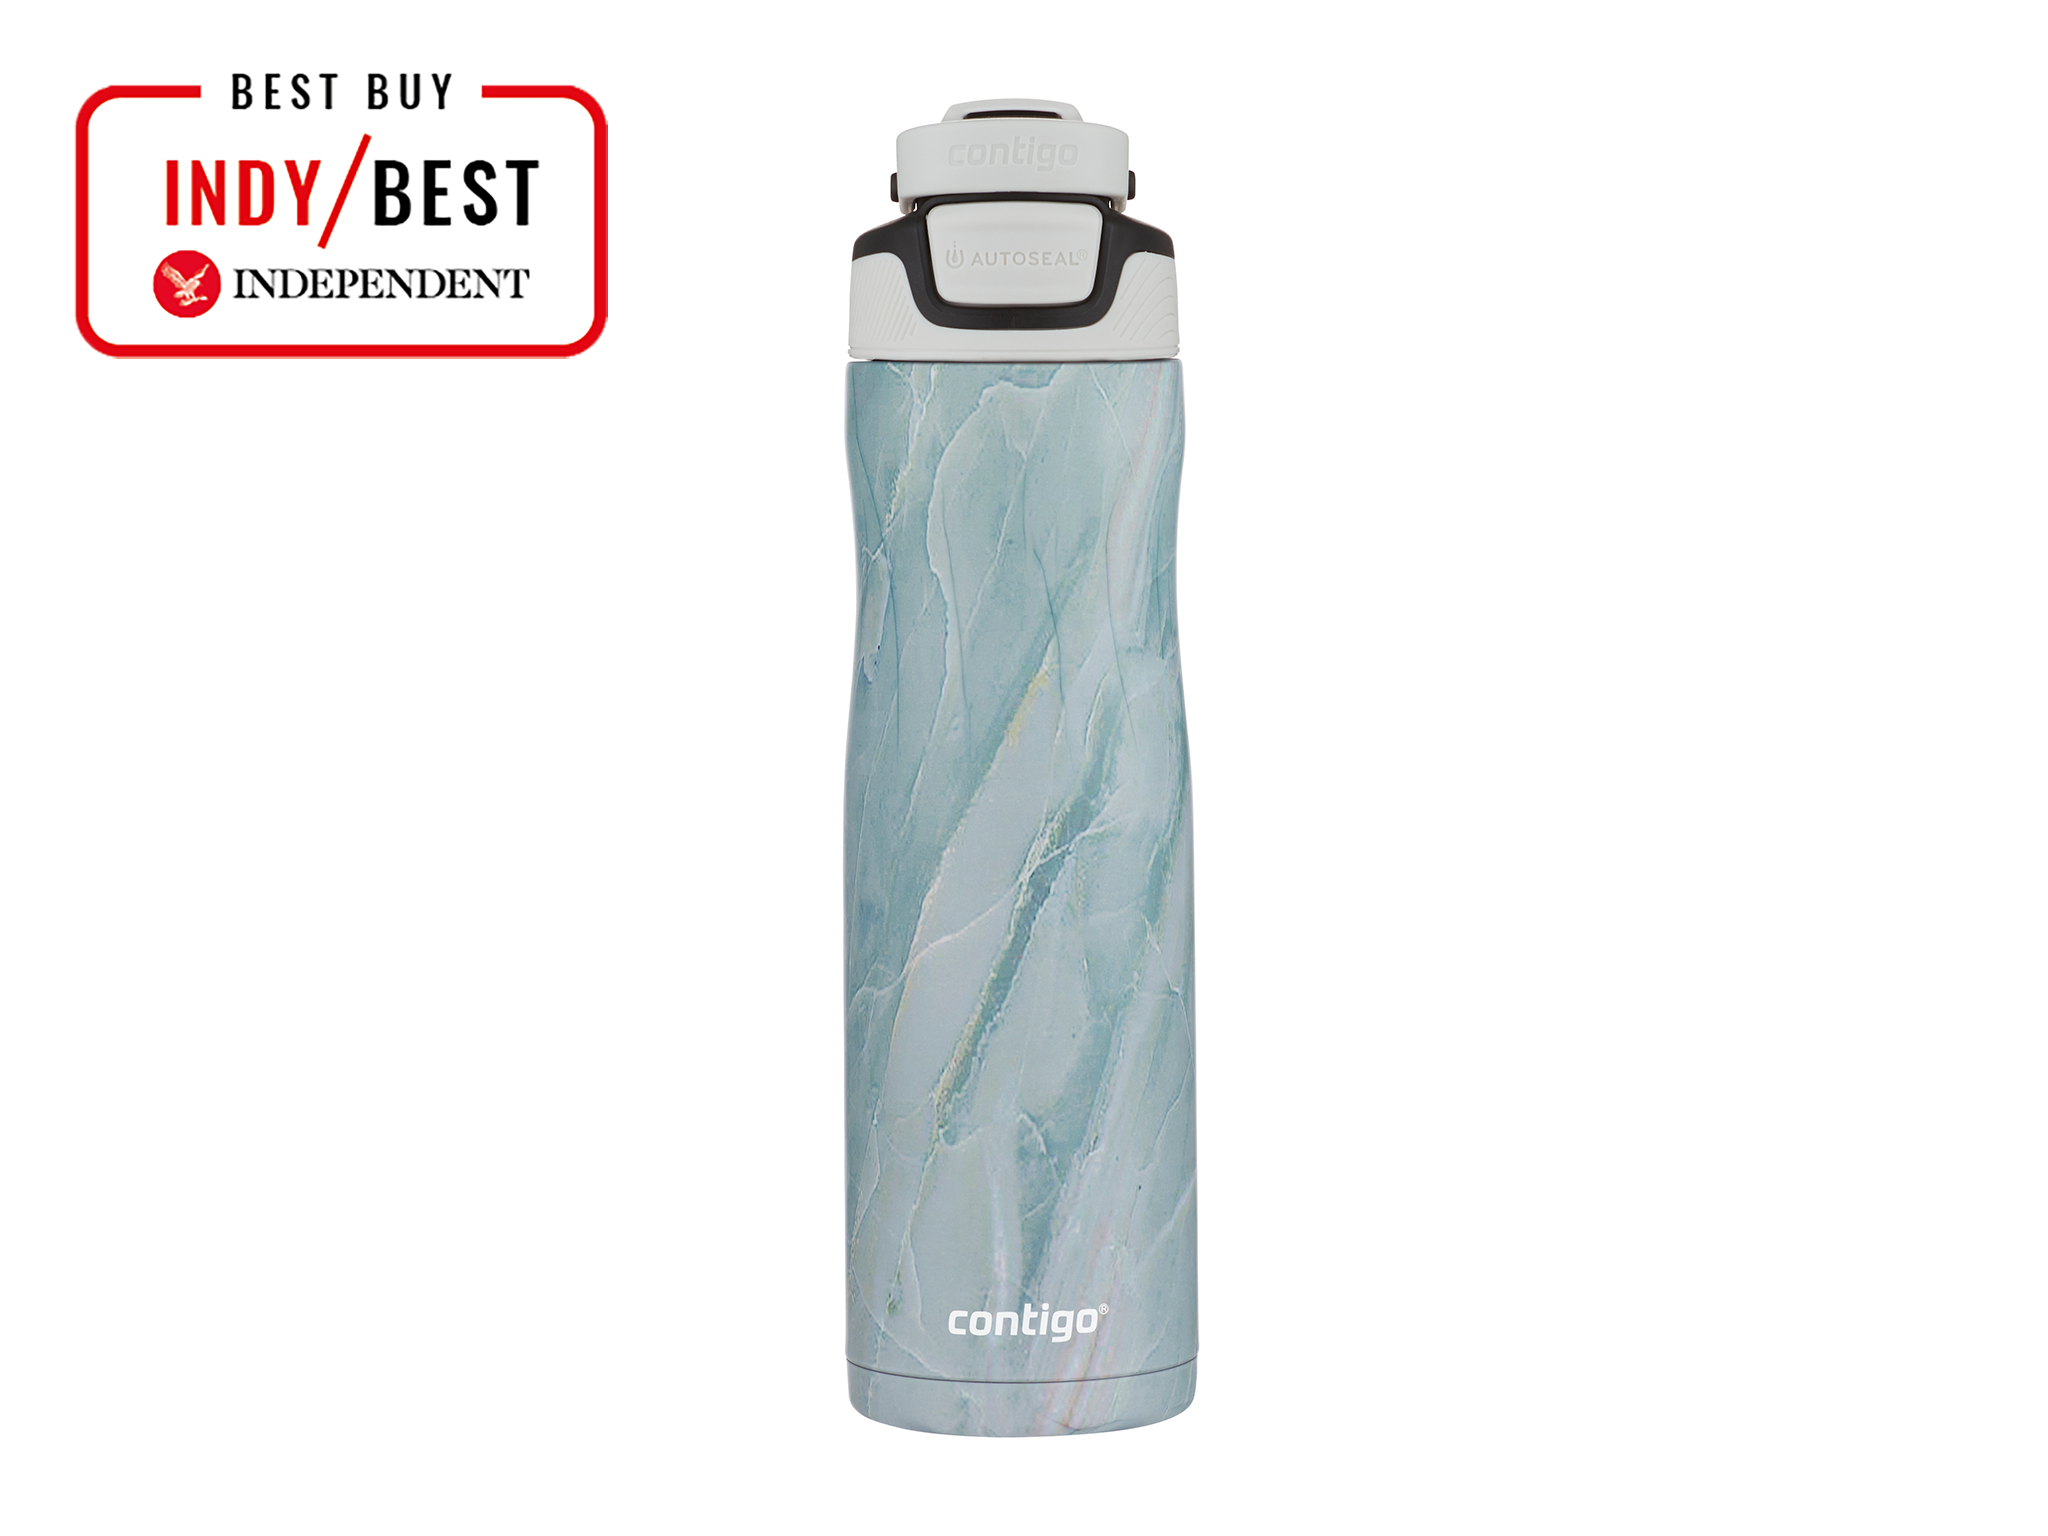  Contigo AUTOSEAL Chill Stainless Steel Water Bottle, 24 oz.,  Very Berry : Sports & Outdoors